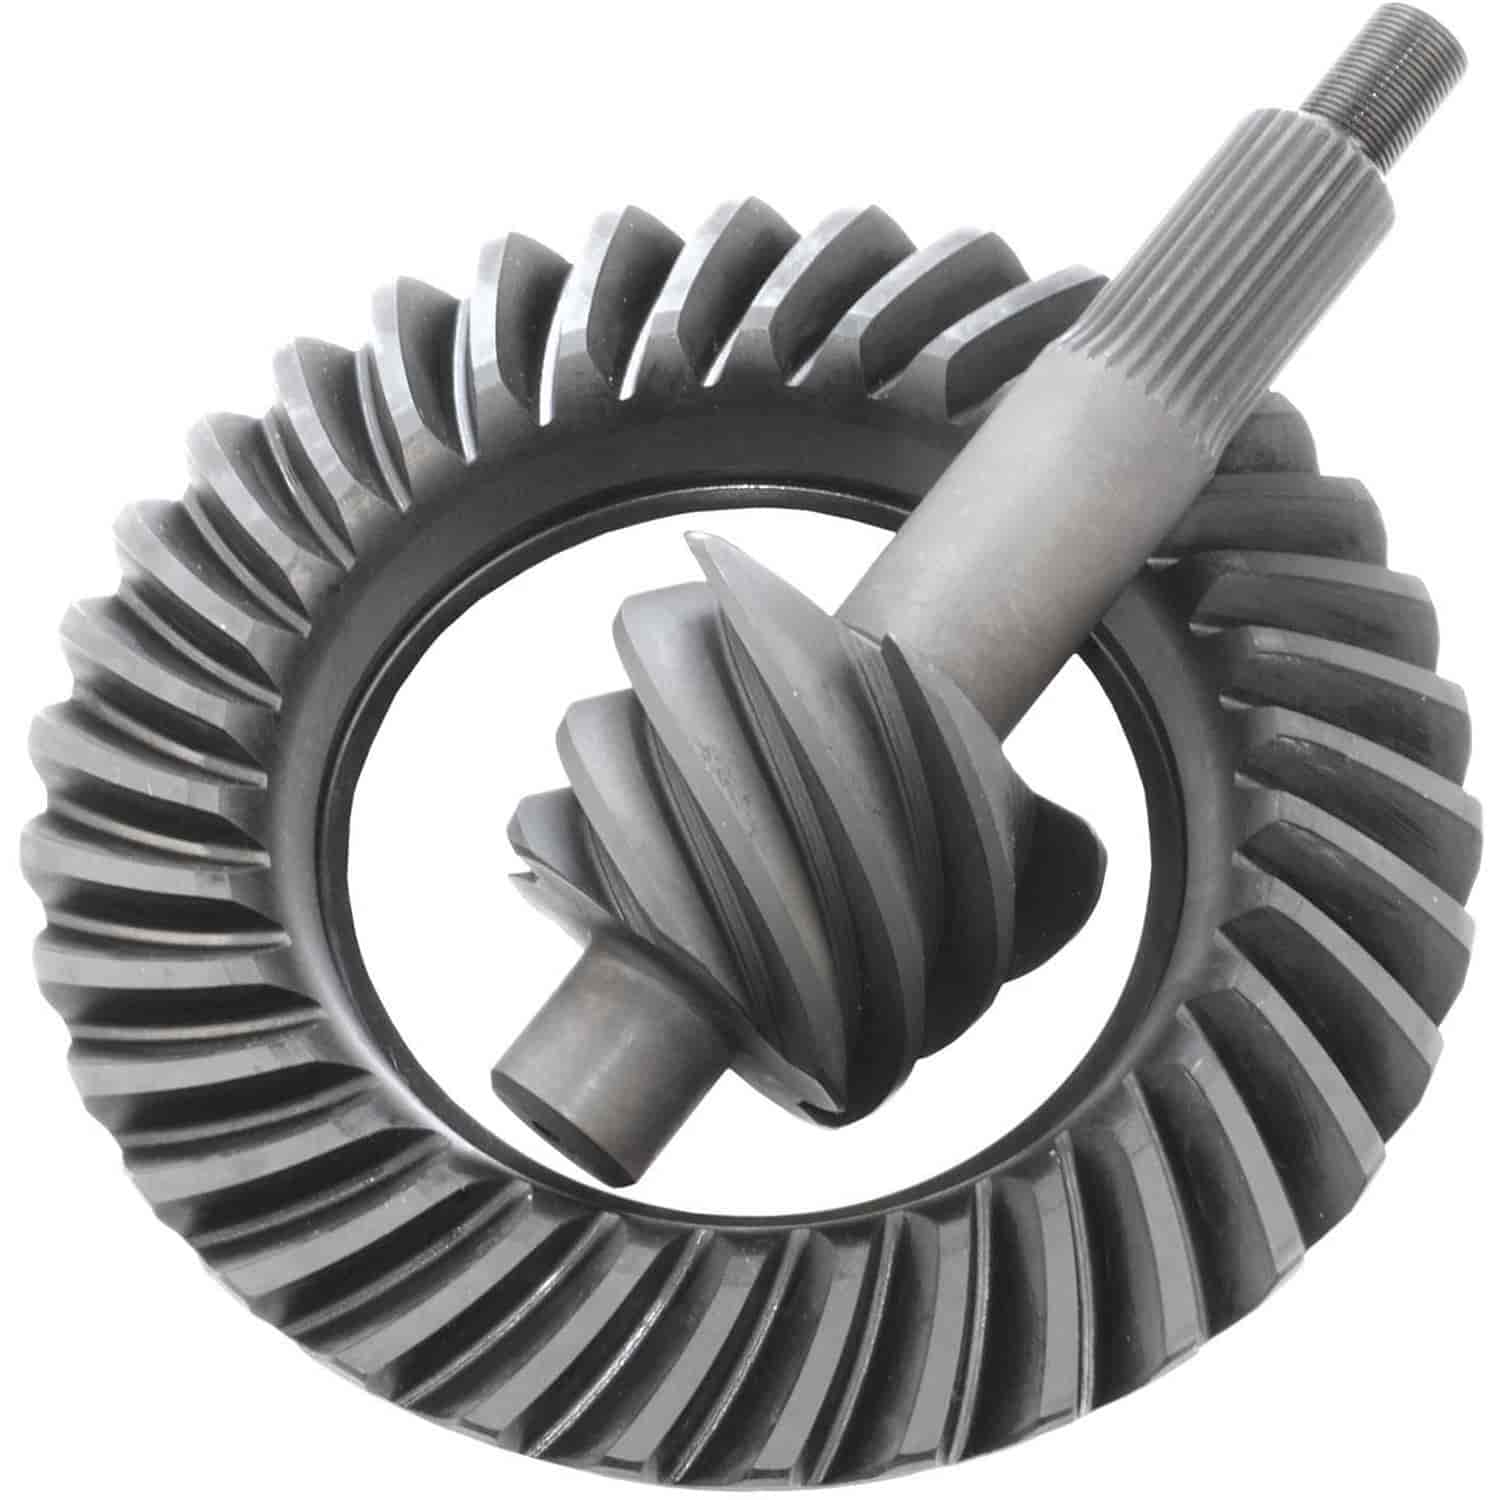 Excel Ring & Pinion Gear Set Ford 9" Ratio: 5.83